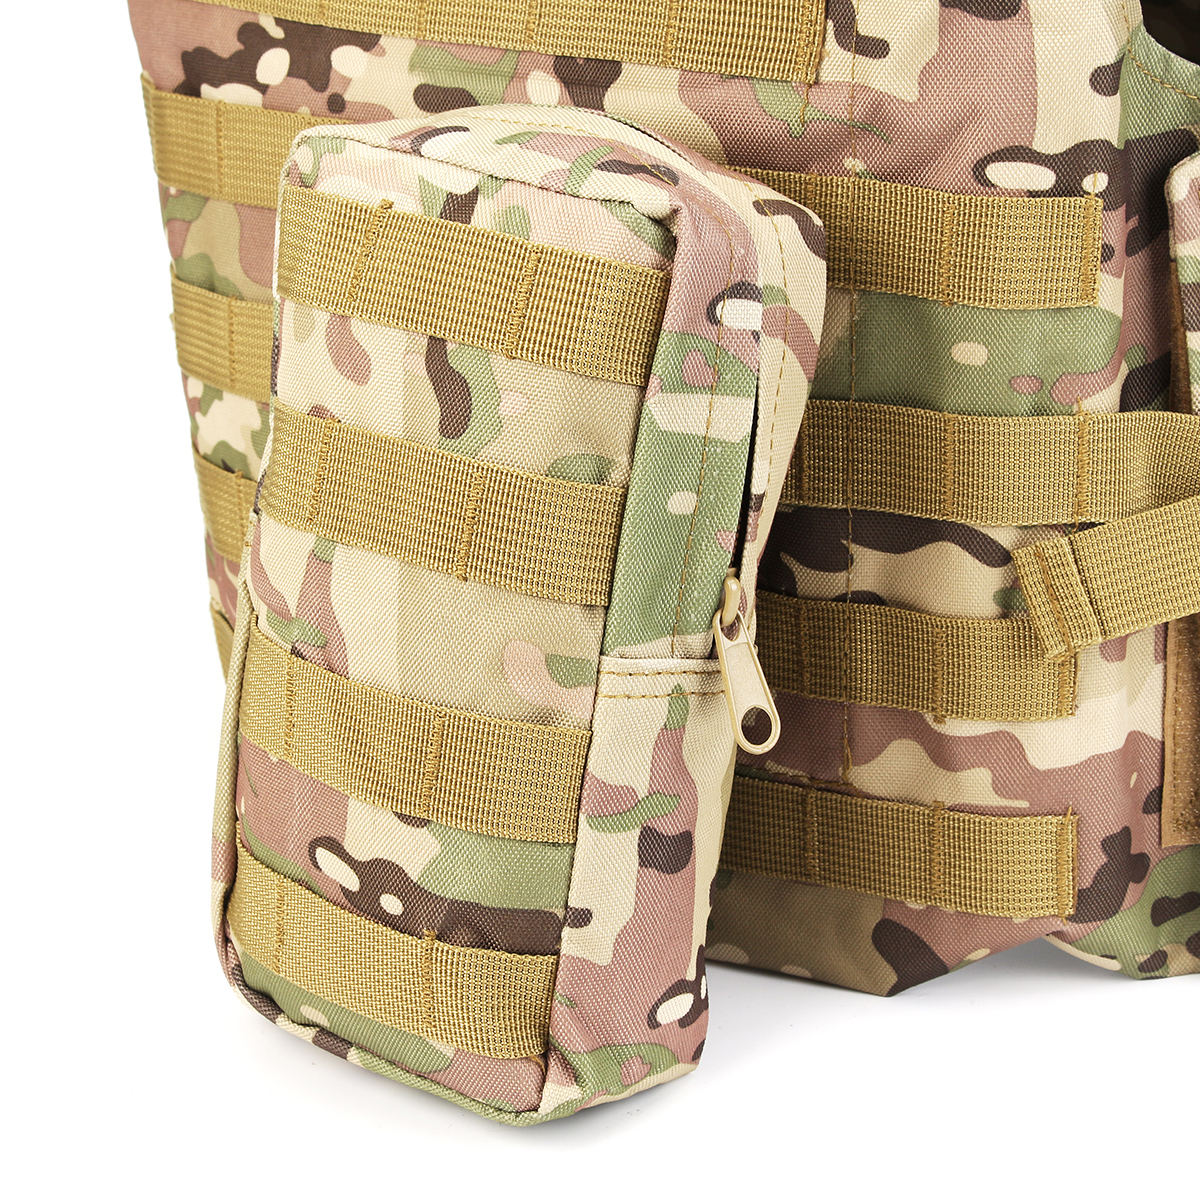 Military-Tactical-Vest-Molle-Combat-Assault-Plate-Carrier-Tactical-Vest-CS-Outdoor-Clothing-Hunting--1817235-9